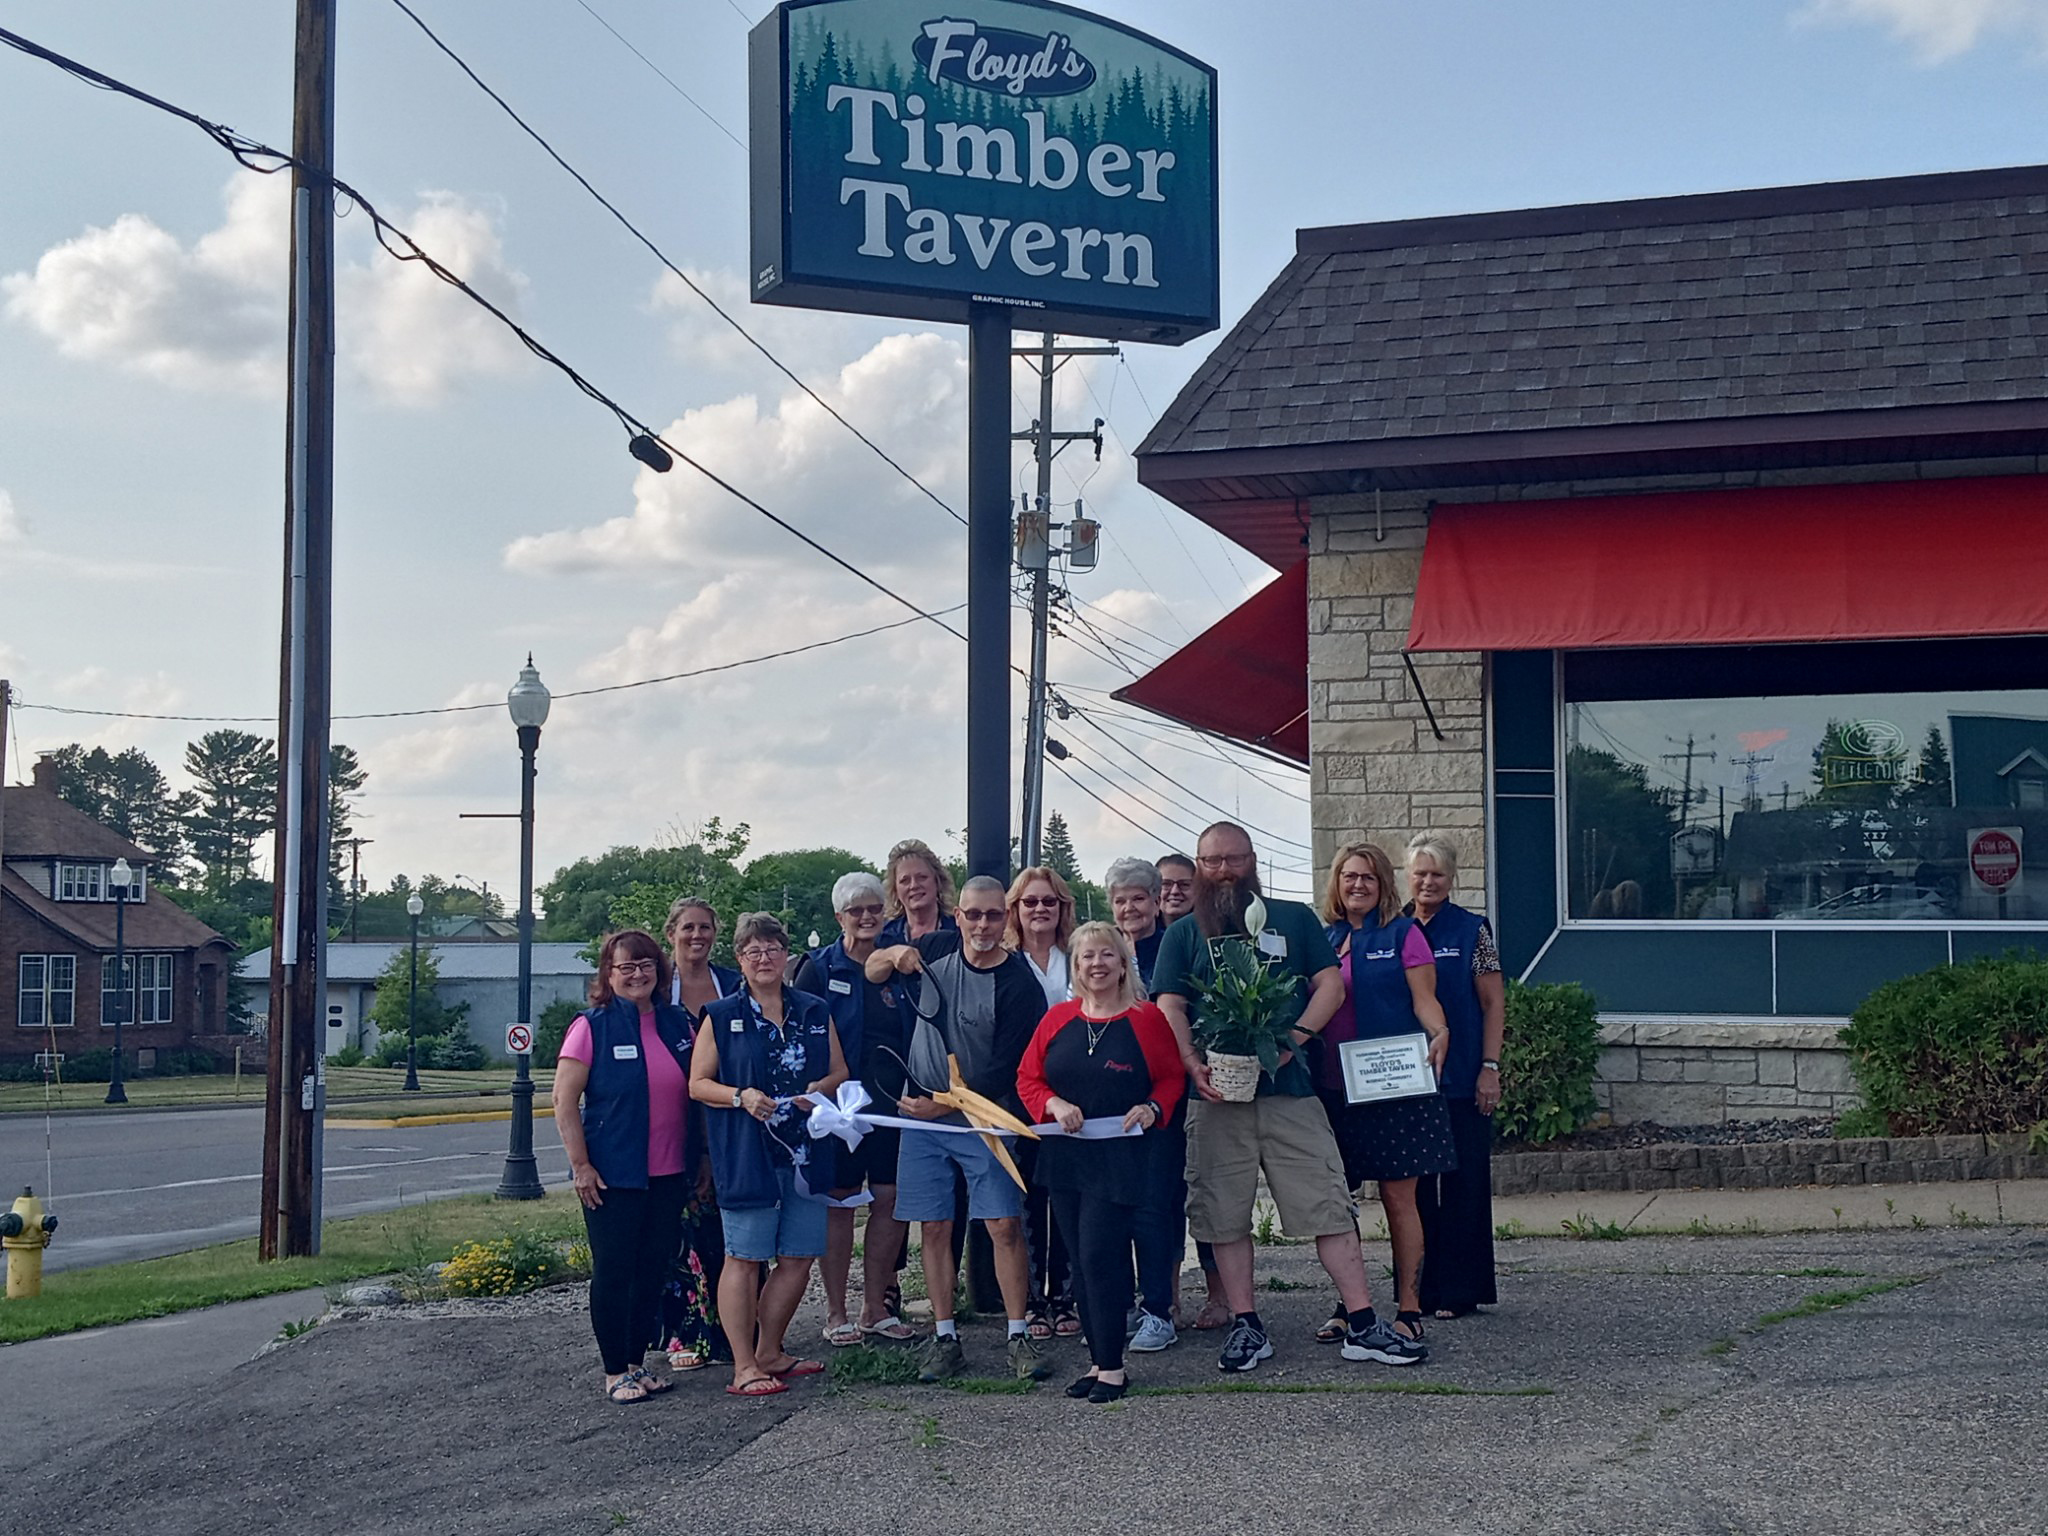 Floyd’s Timber Tavern welcomed to community by Chamber Ambassadors